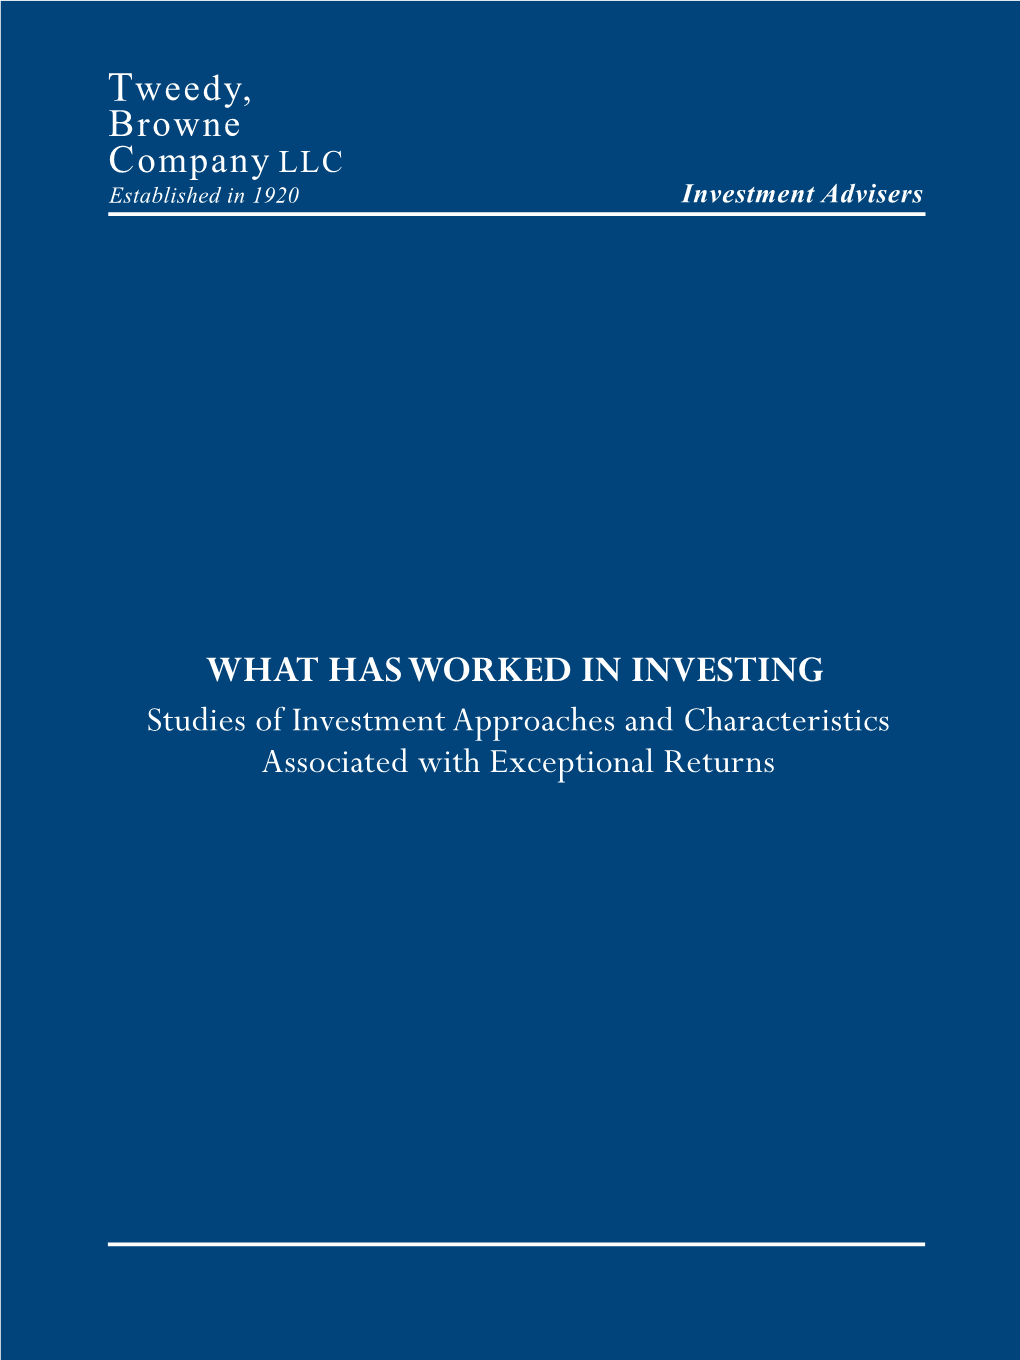 What Has Worked in Investing? (Tweedy, Browne Company)